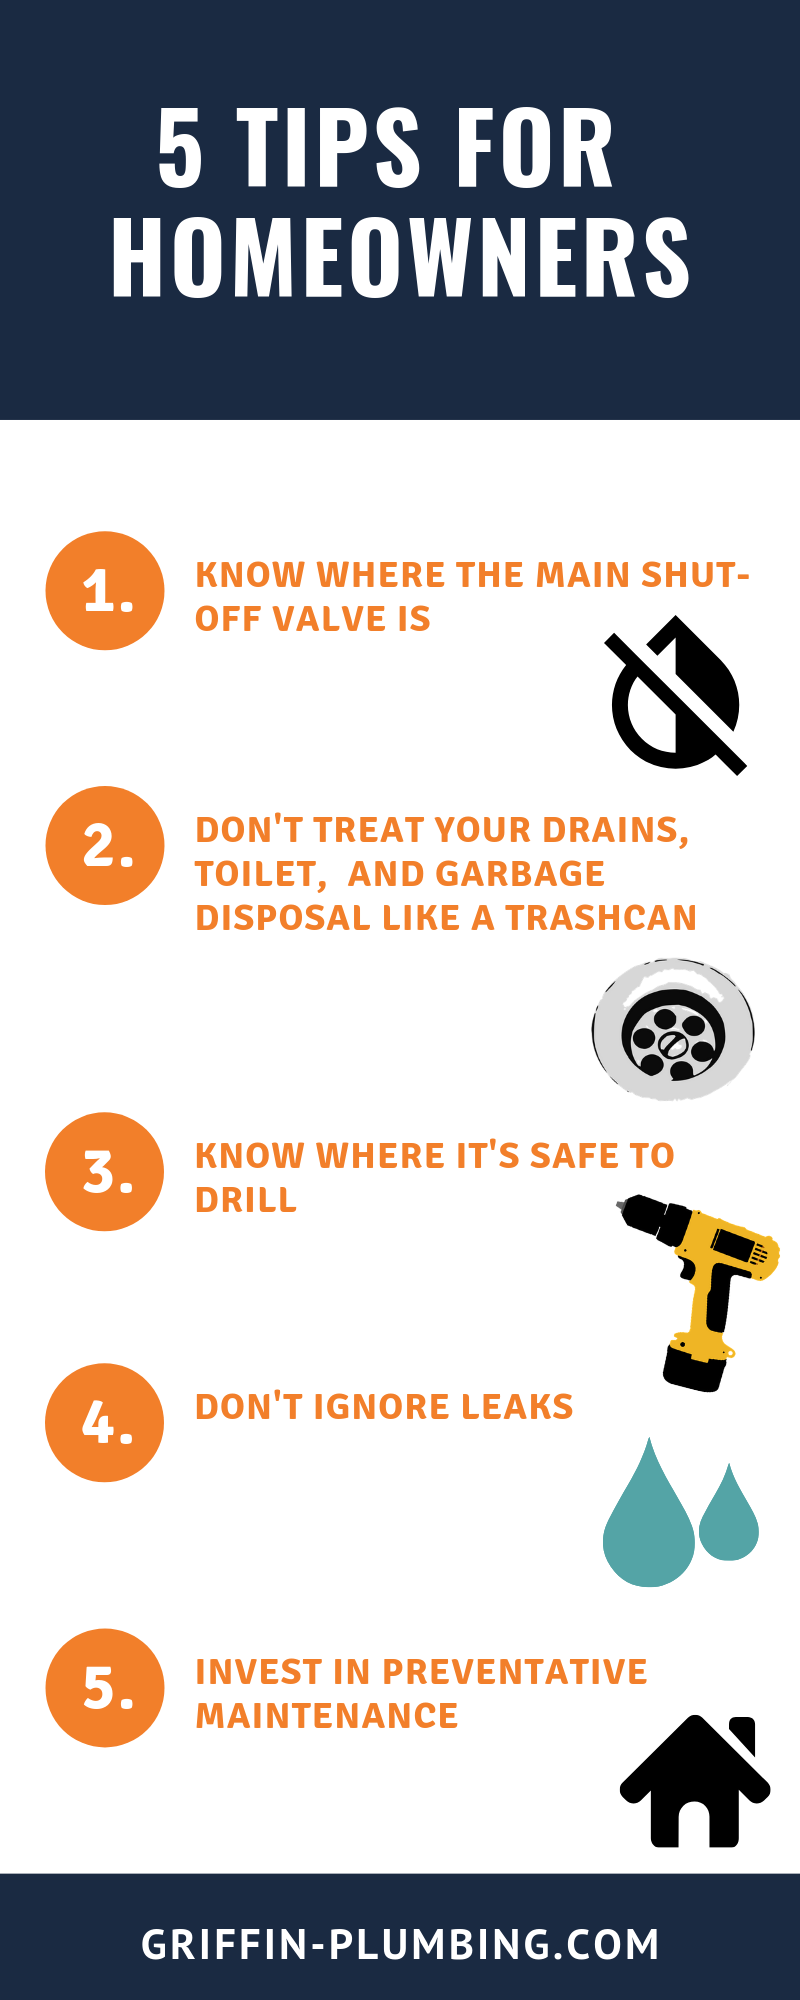 Plumbing Tips - Don’t Pour Grease Or Oil Down The Drain